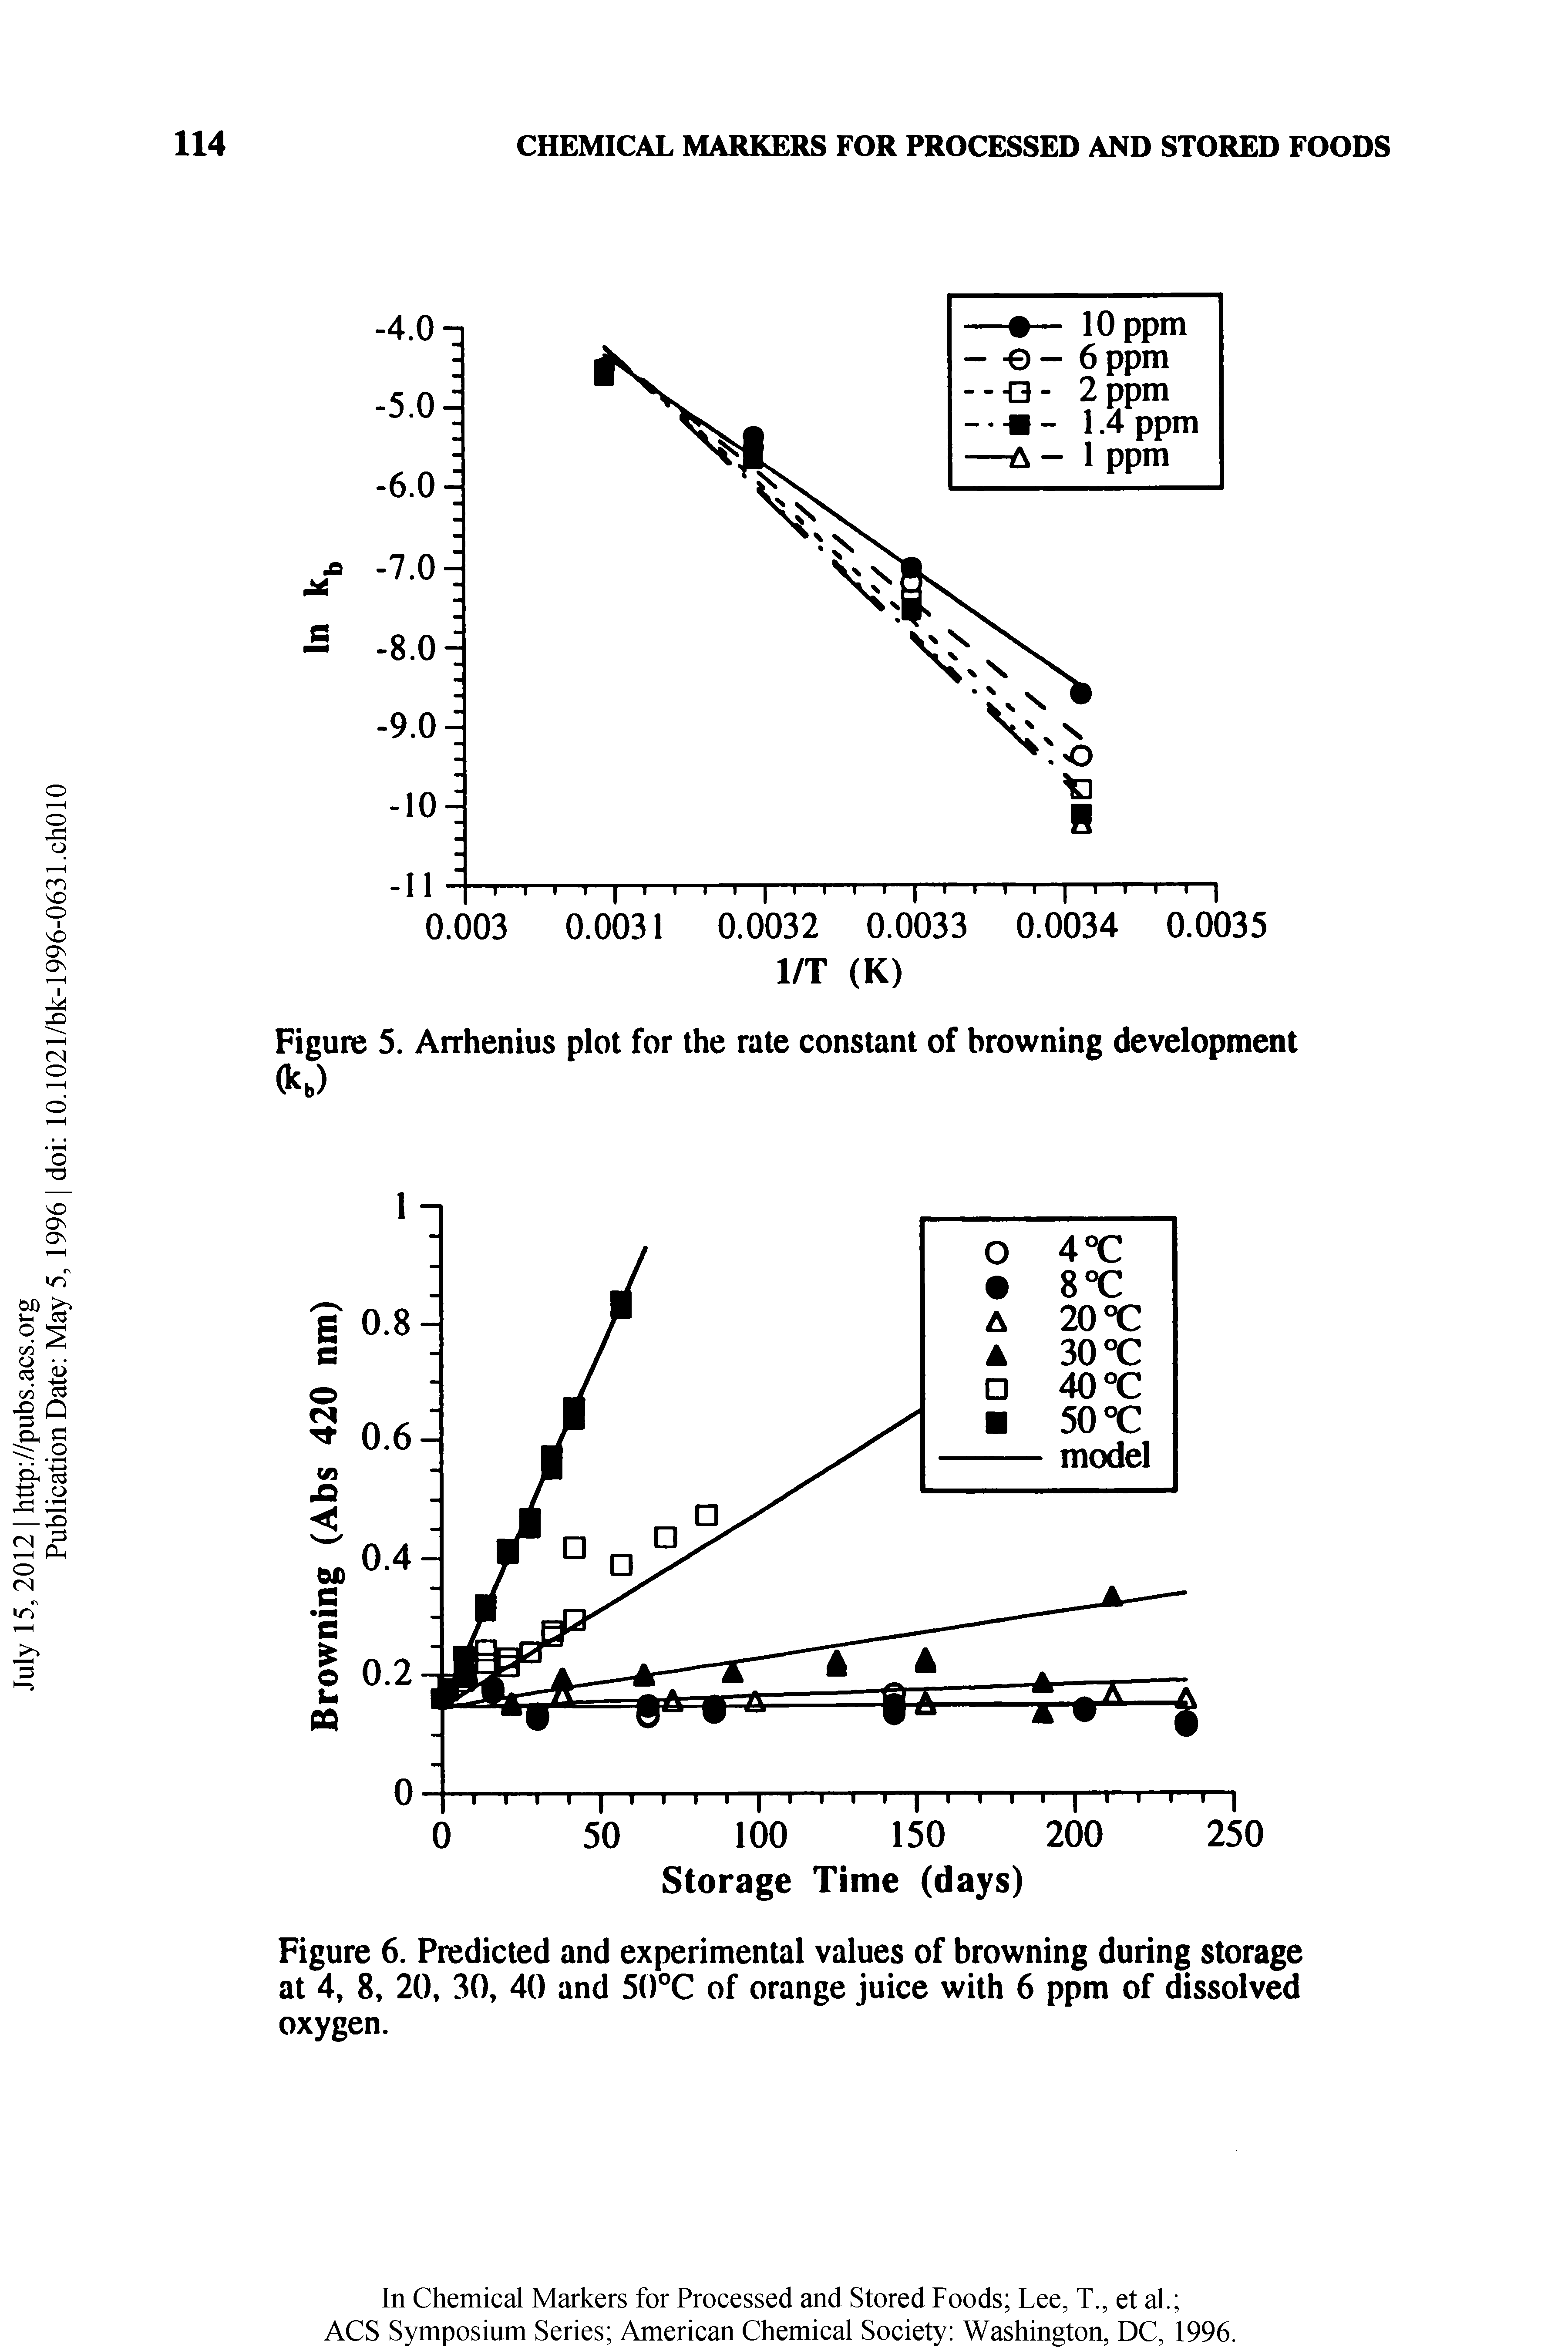 Figure 6. Predicted and experimental values of browning during storage at 4, 8, 20, 30, 40 and 50°C of orange juice with 6 ppm of dissolved oxygen.